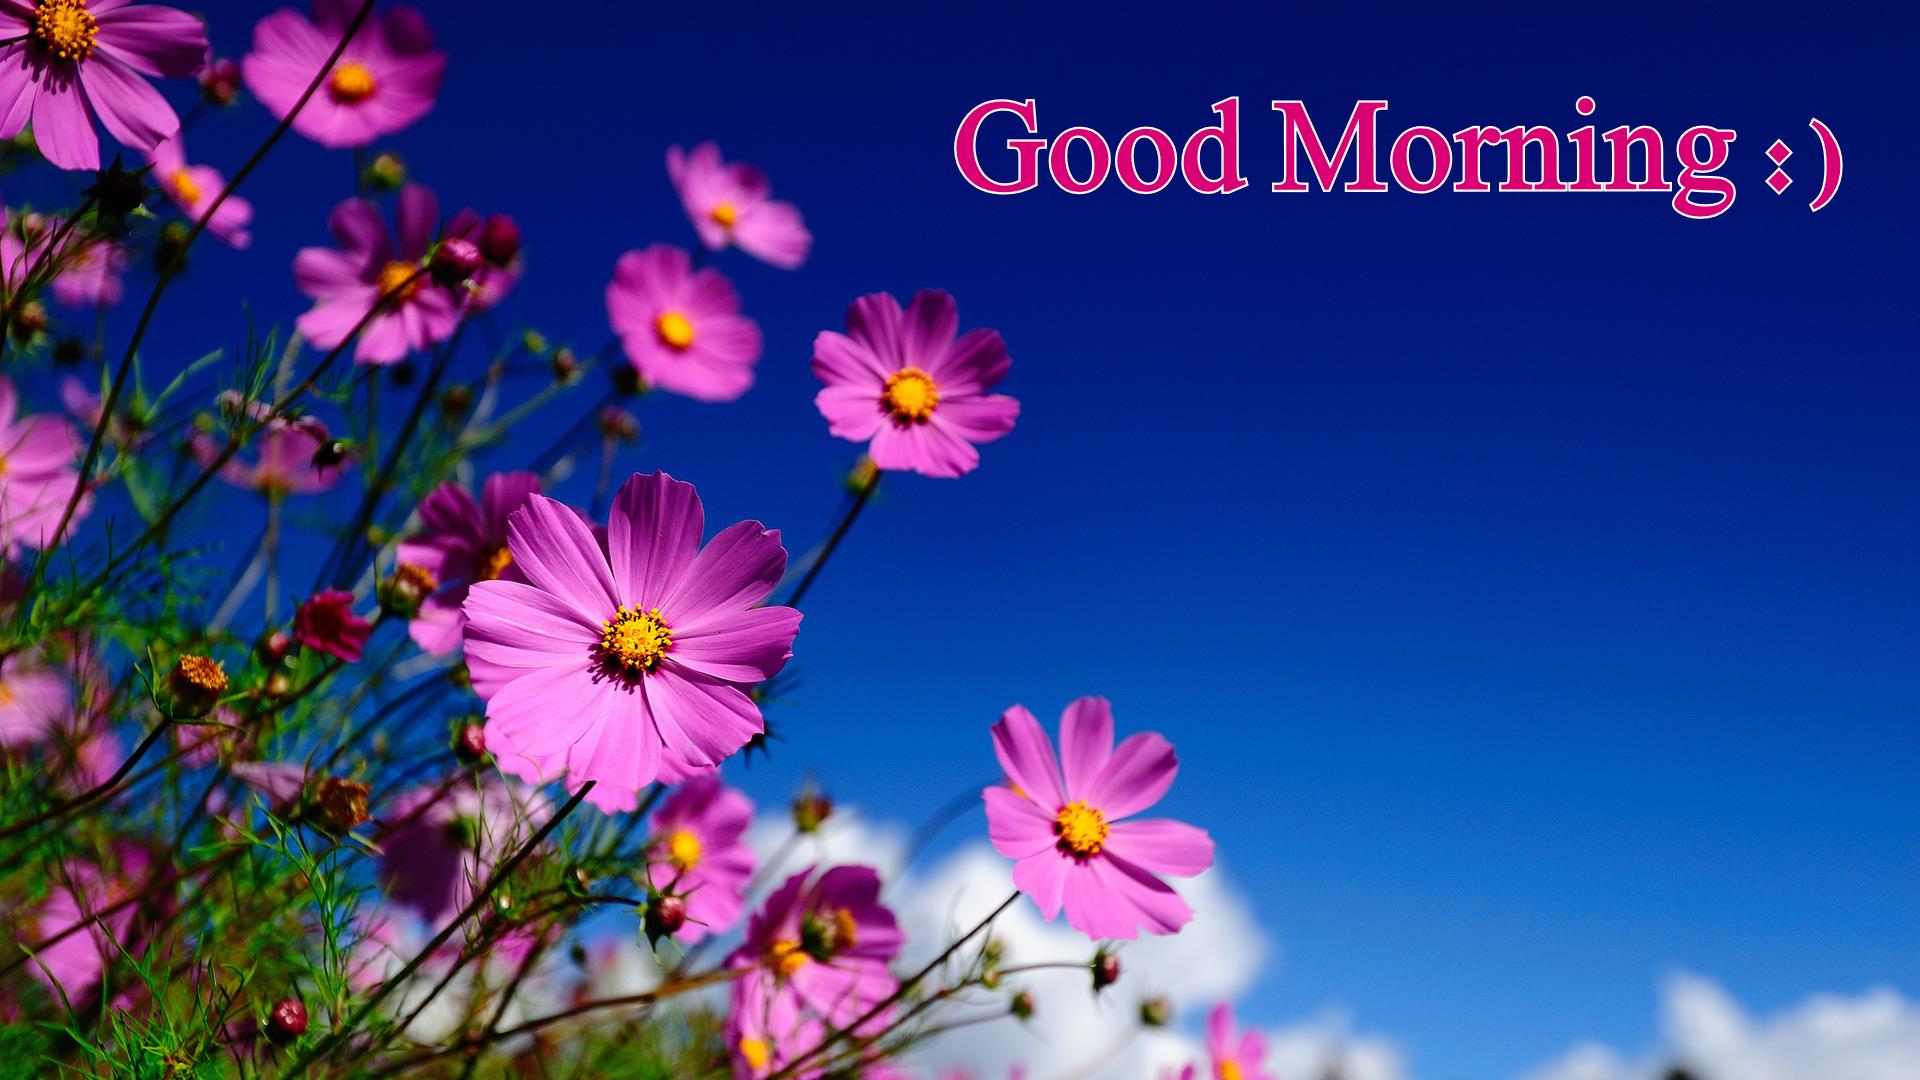  Wallpapers like that of good morning Sunday wishes wallpapers will